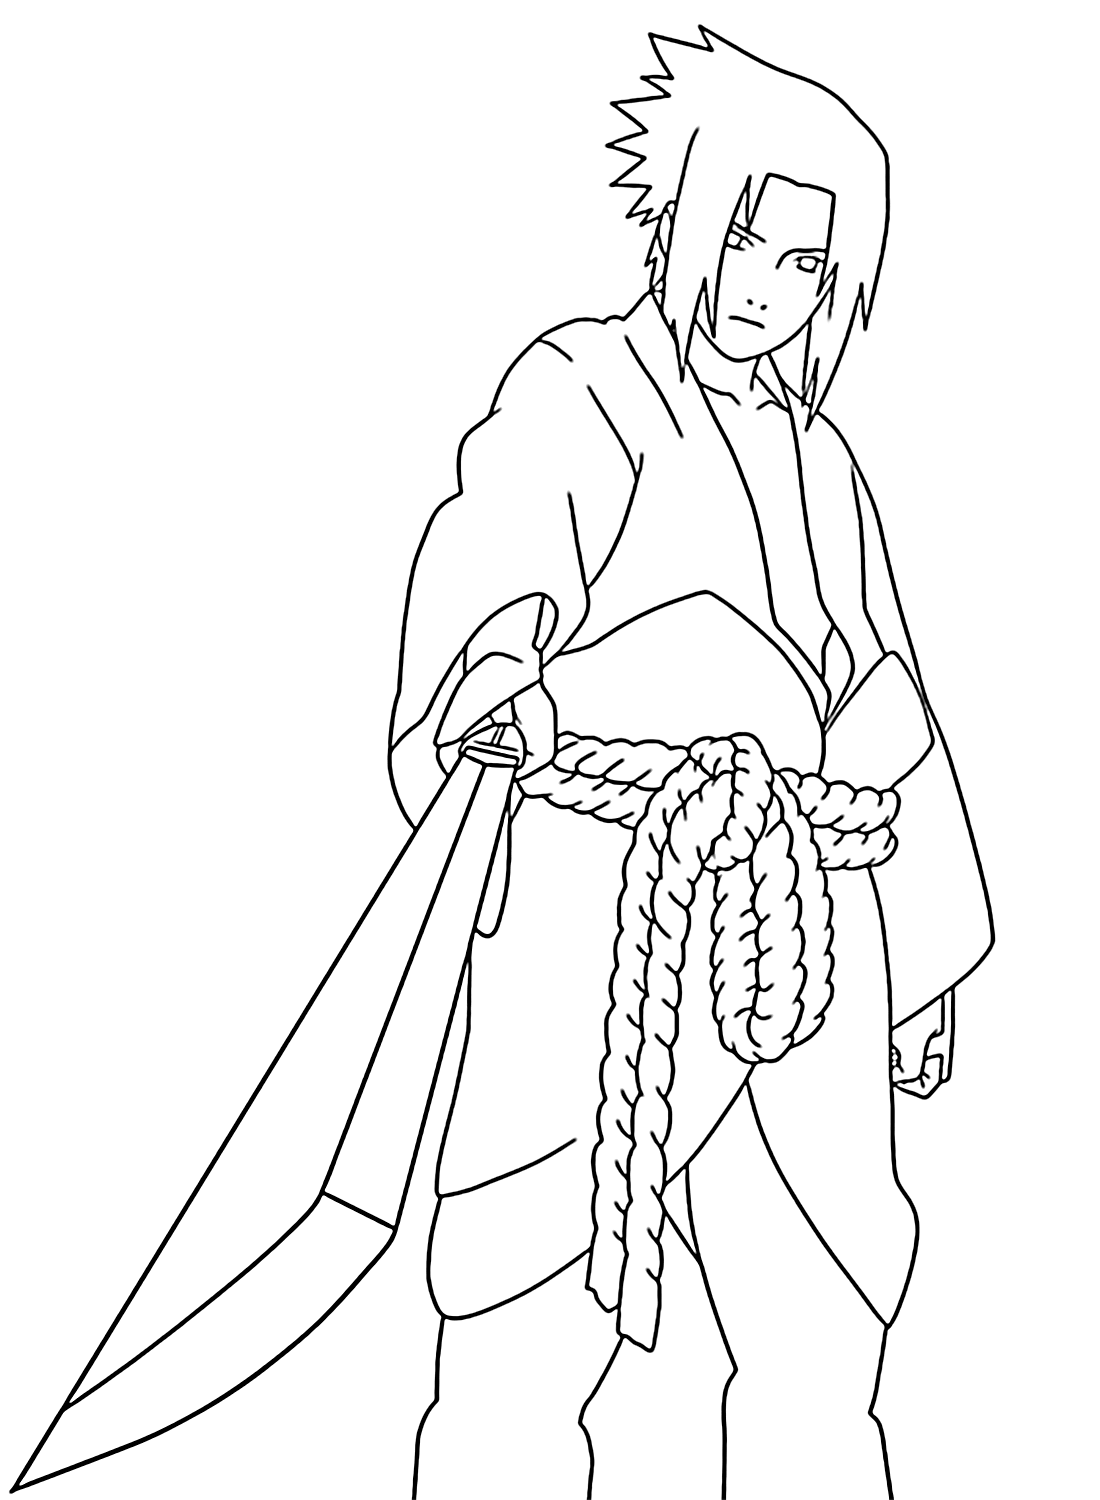 Sasuke Images Coloring Pages